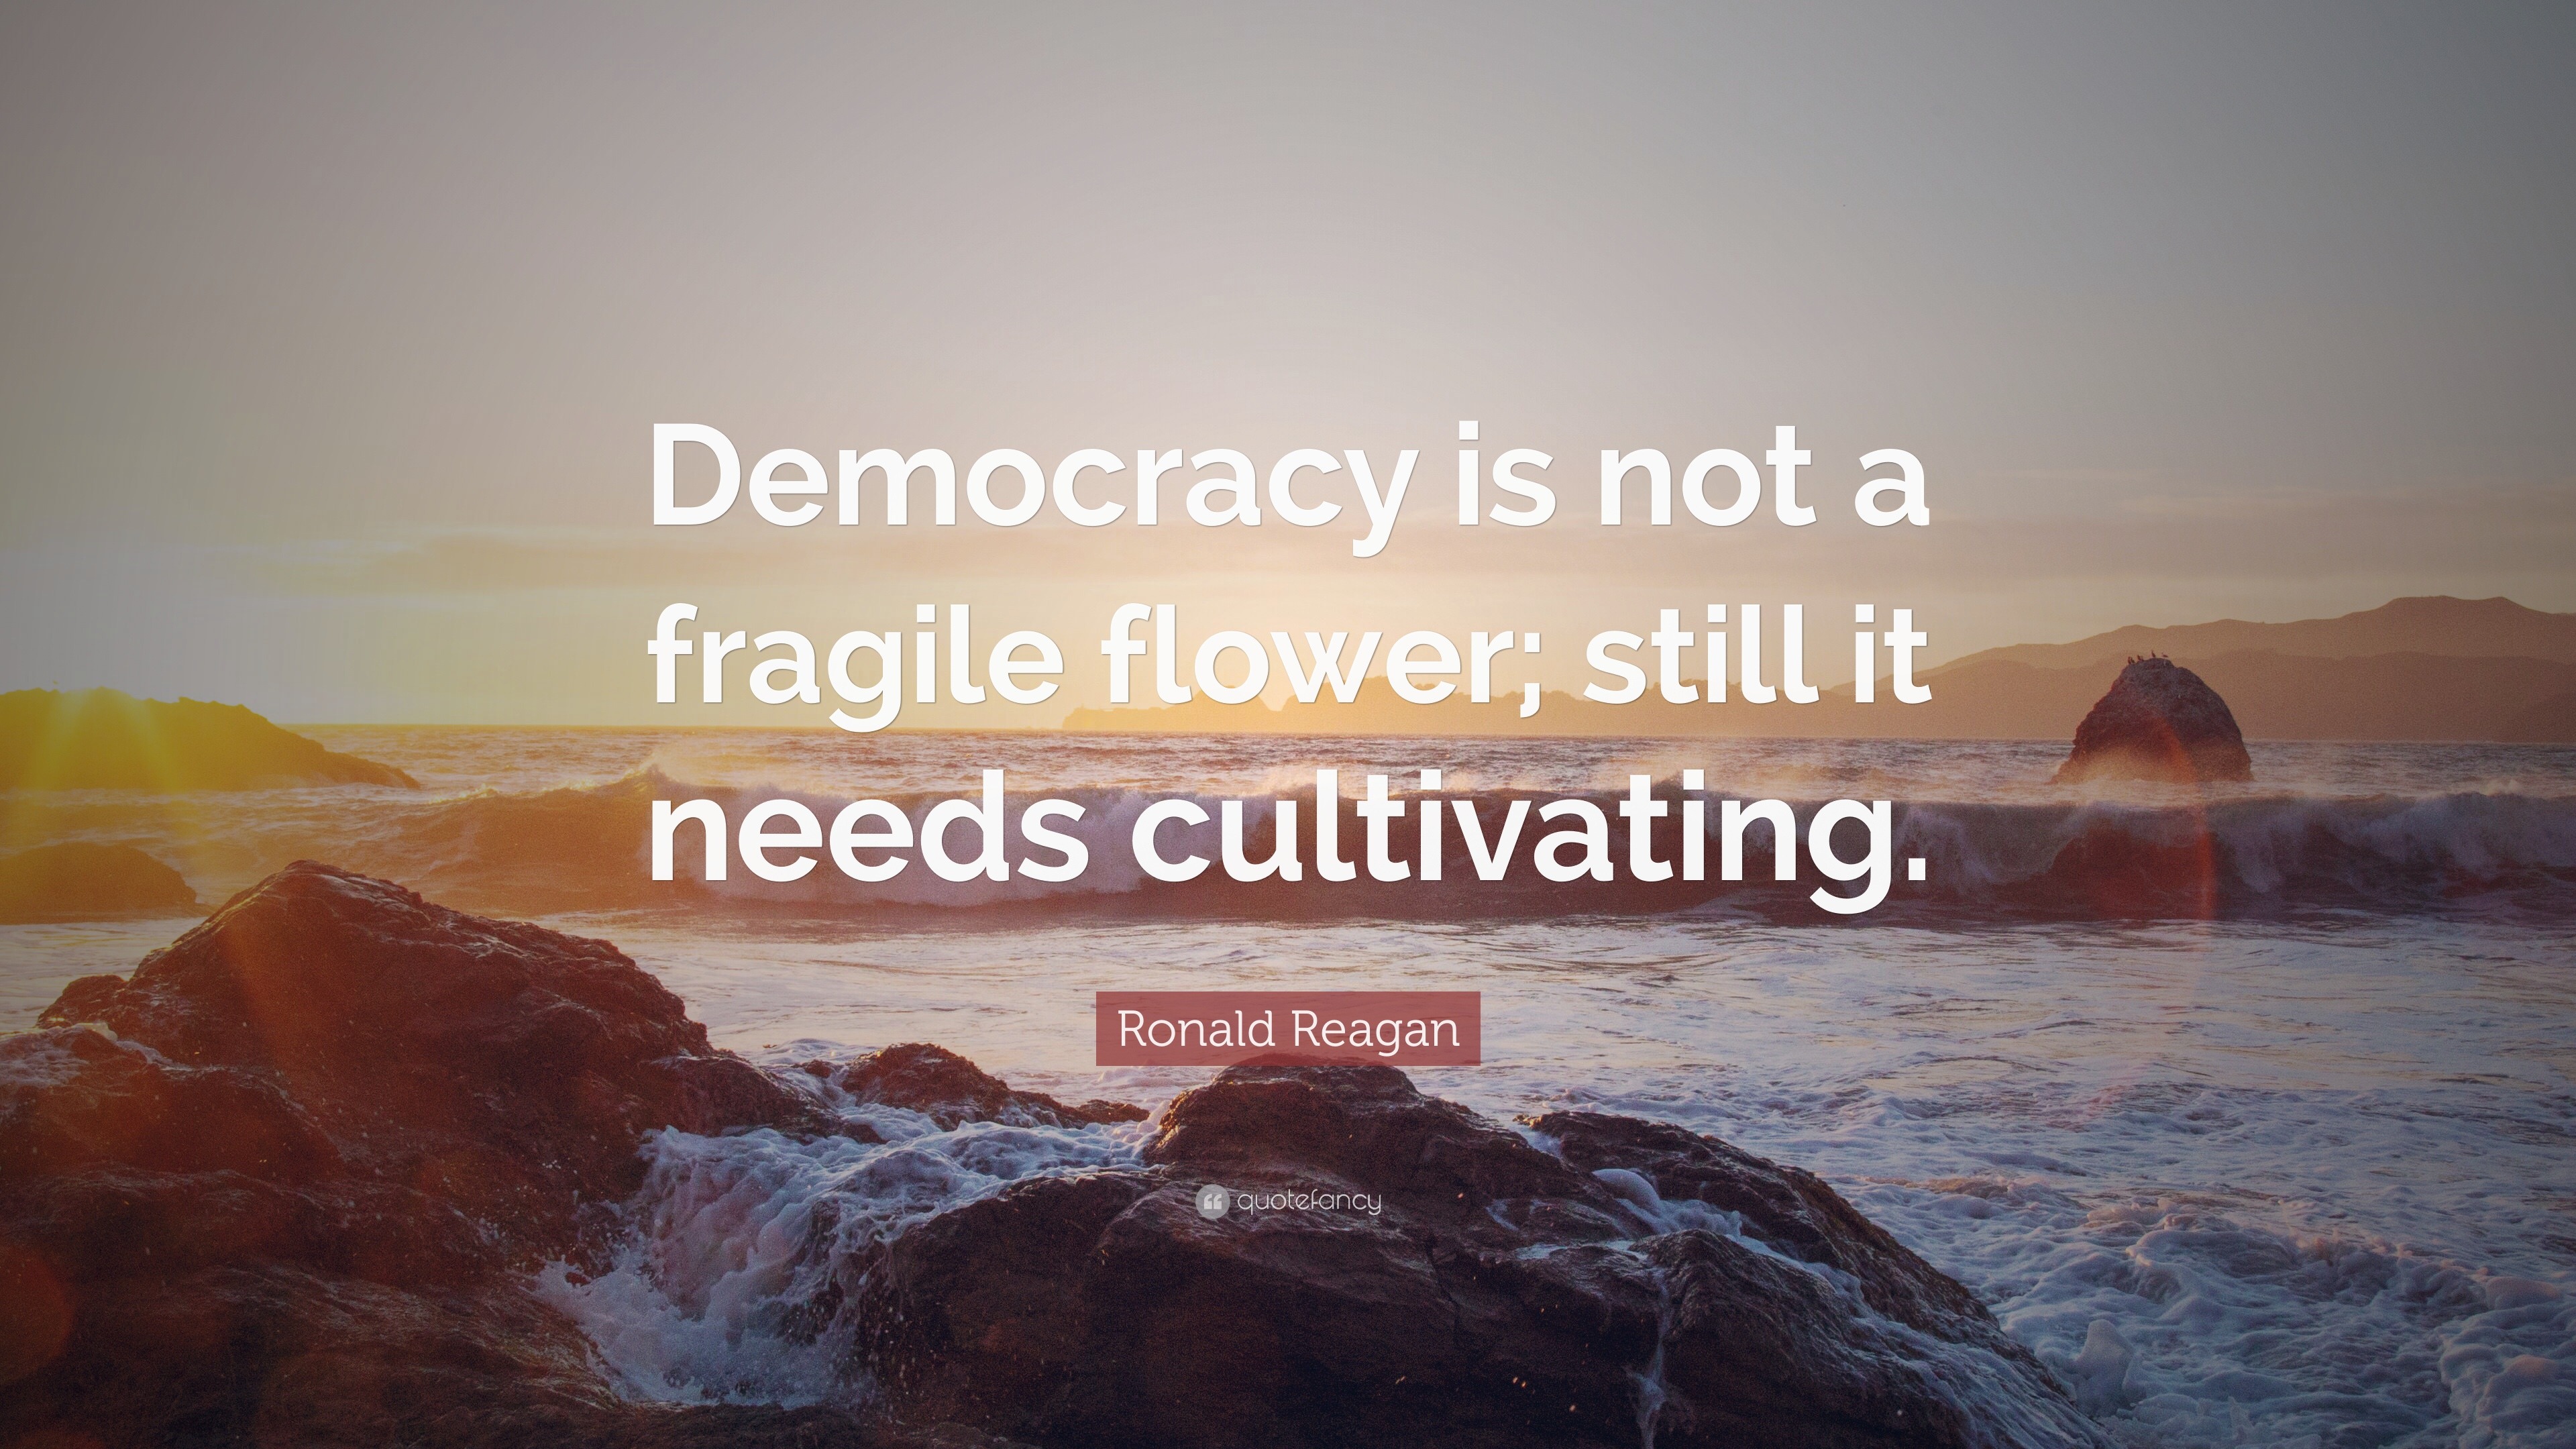 Ronald Reagan Quote: “Democracy is not a fragile flower; still it needs